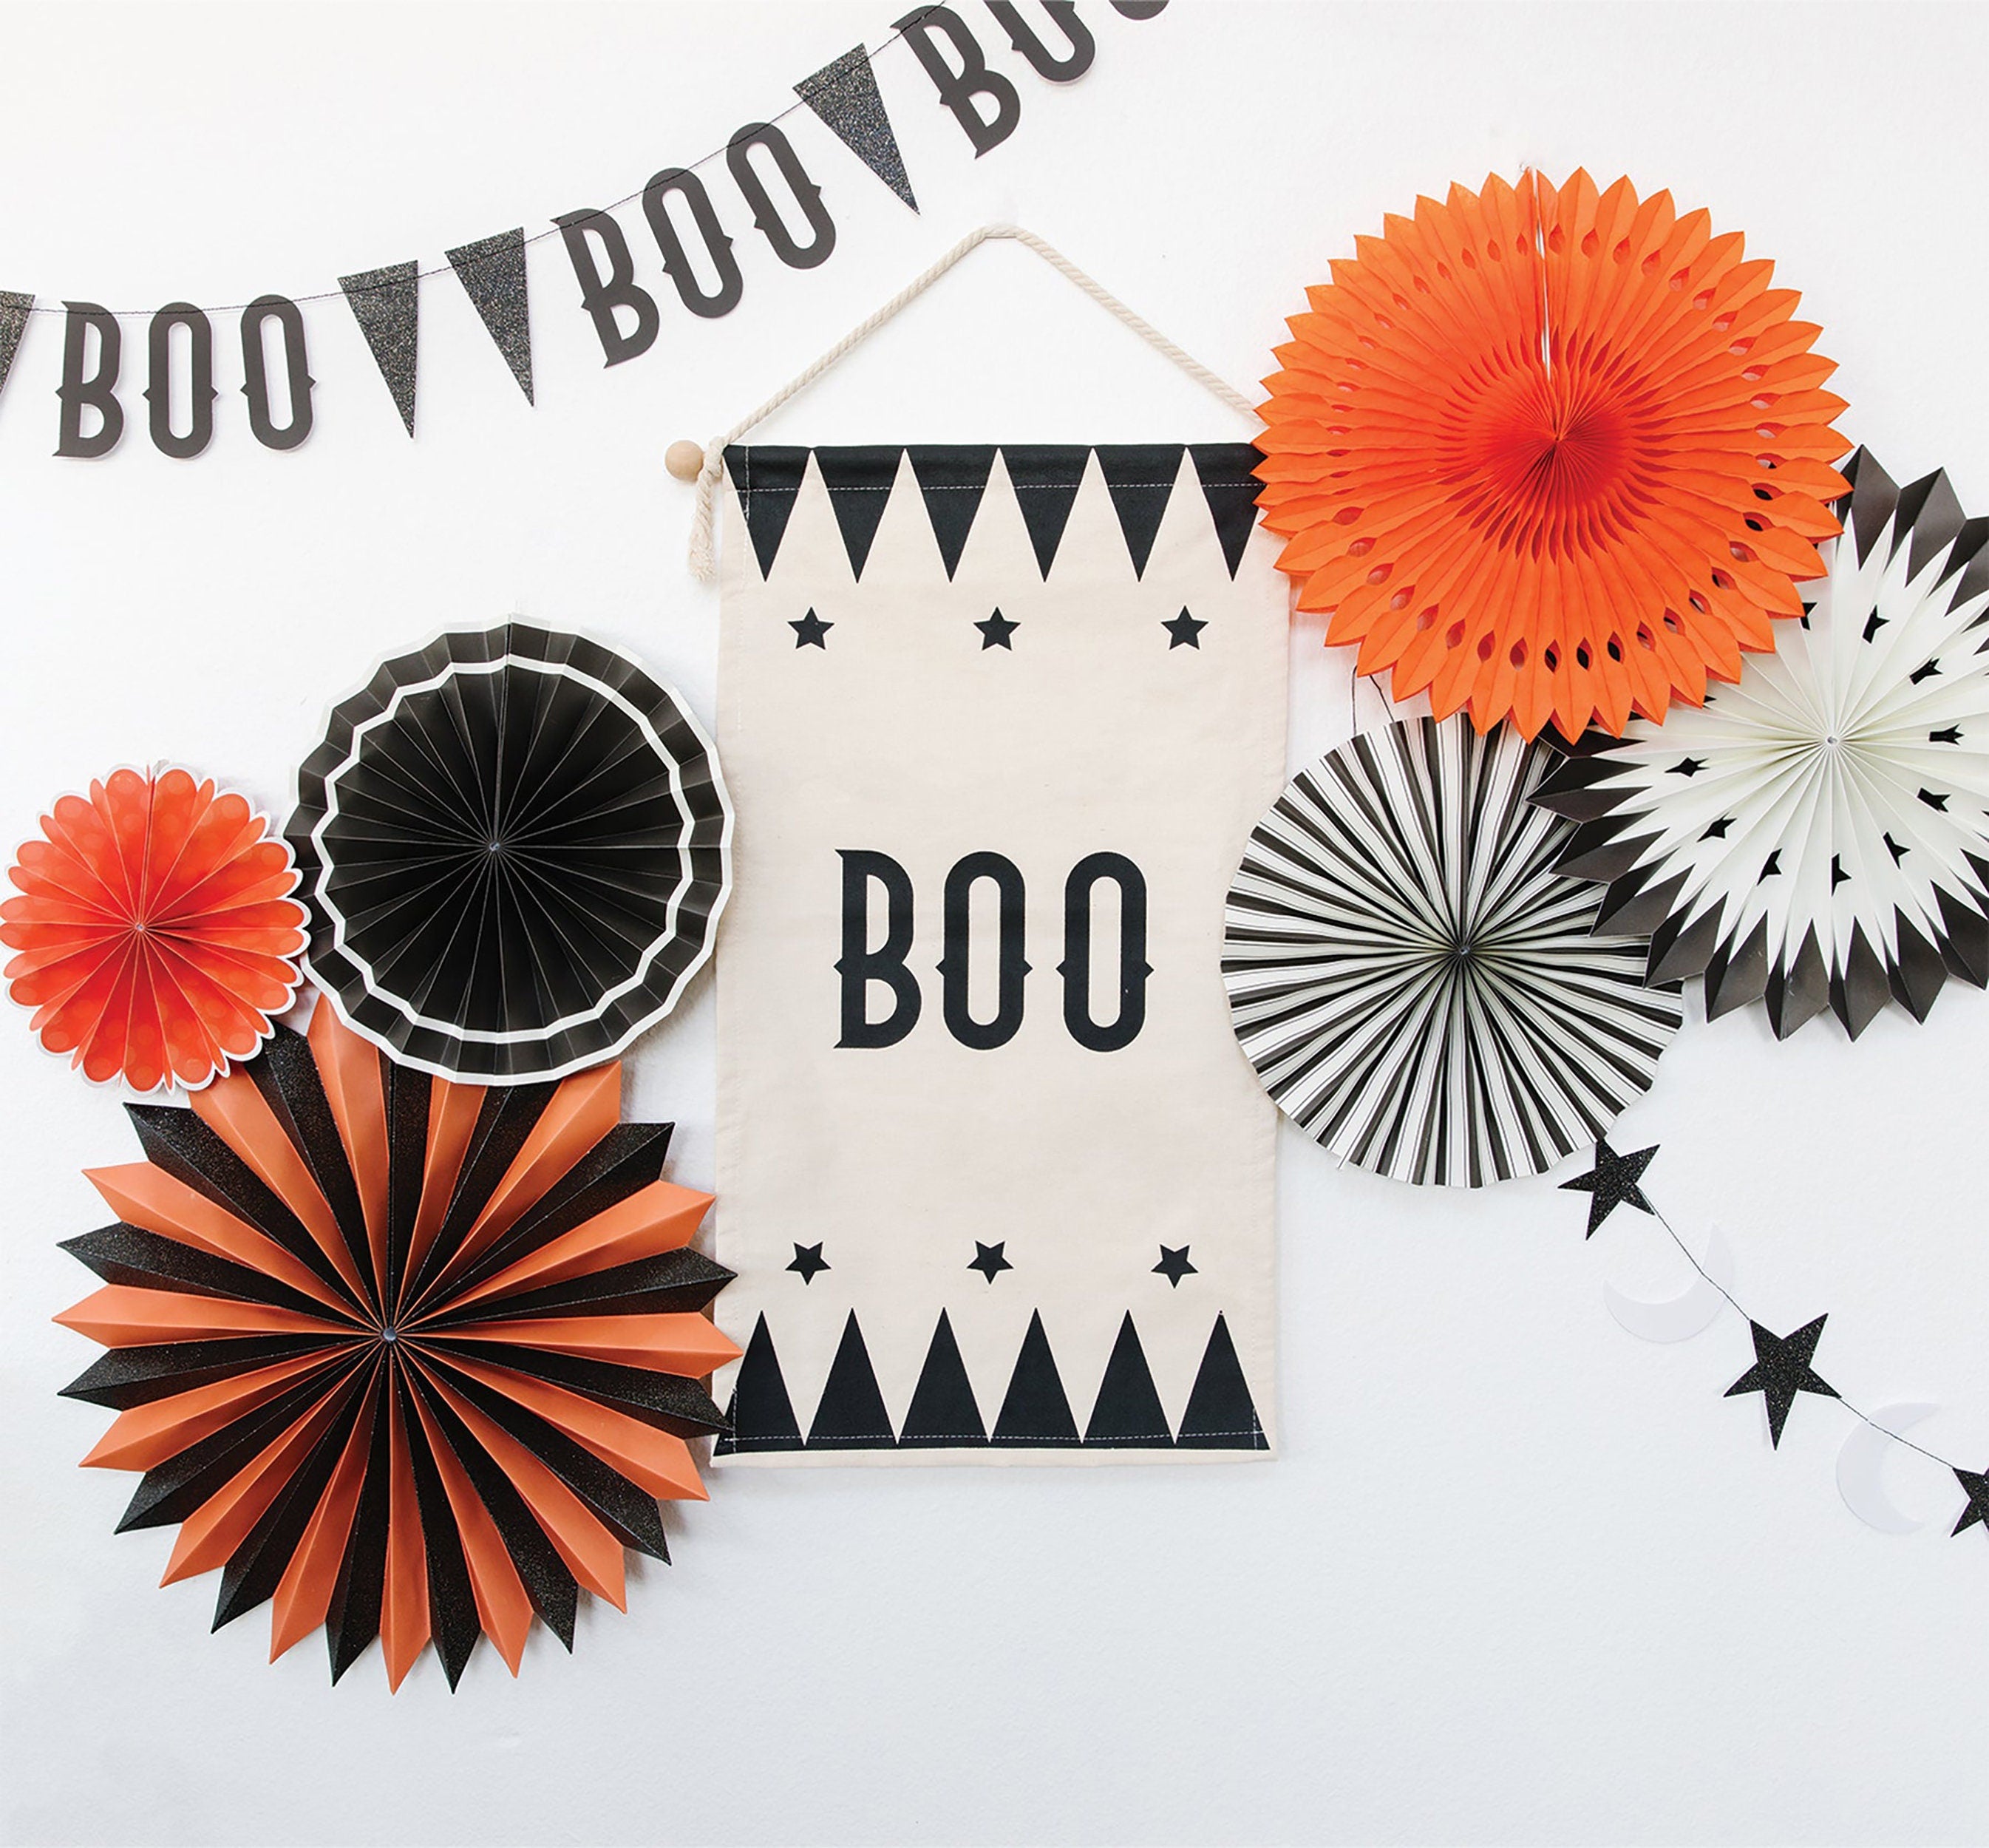 Halloween Candy Plates | Halloween Plates - Halloween Tableware - Candy Plates - Halloween Birthday Party - Halloween Party Plates